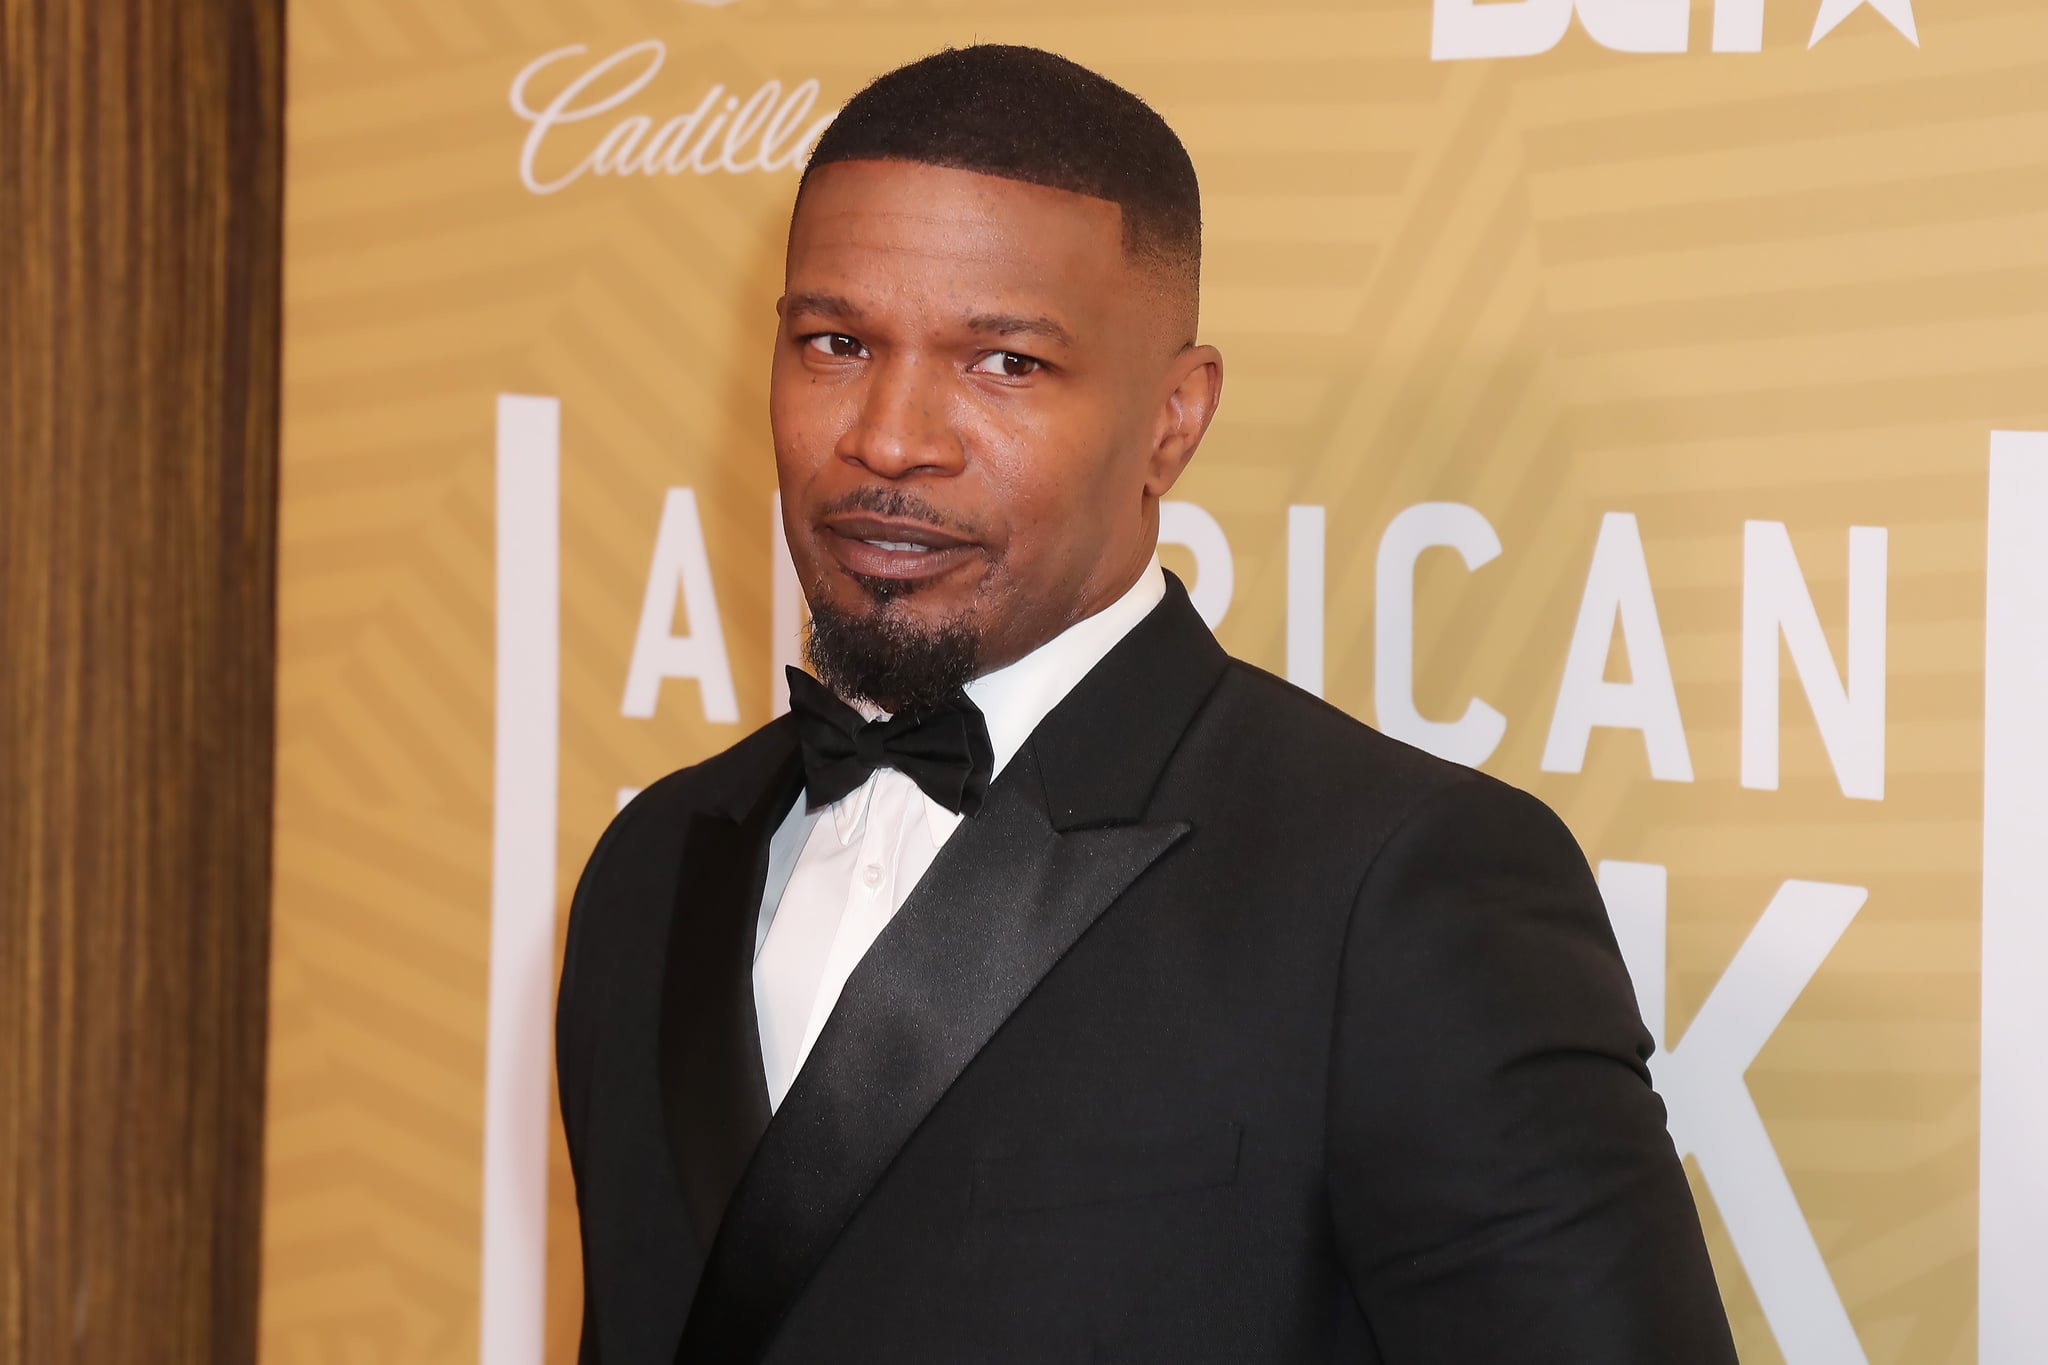 BEVERLY HILLS, CALIFORNIA - FEBRUARY 23: Jamie Foxx attends American Black Film Festival Honours Awards Ceremony at The Beverly Hilton Hotel on February 23, 2020 in Beverly Hills, California. (Photo by Leon Bennett/WireImage)